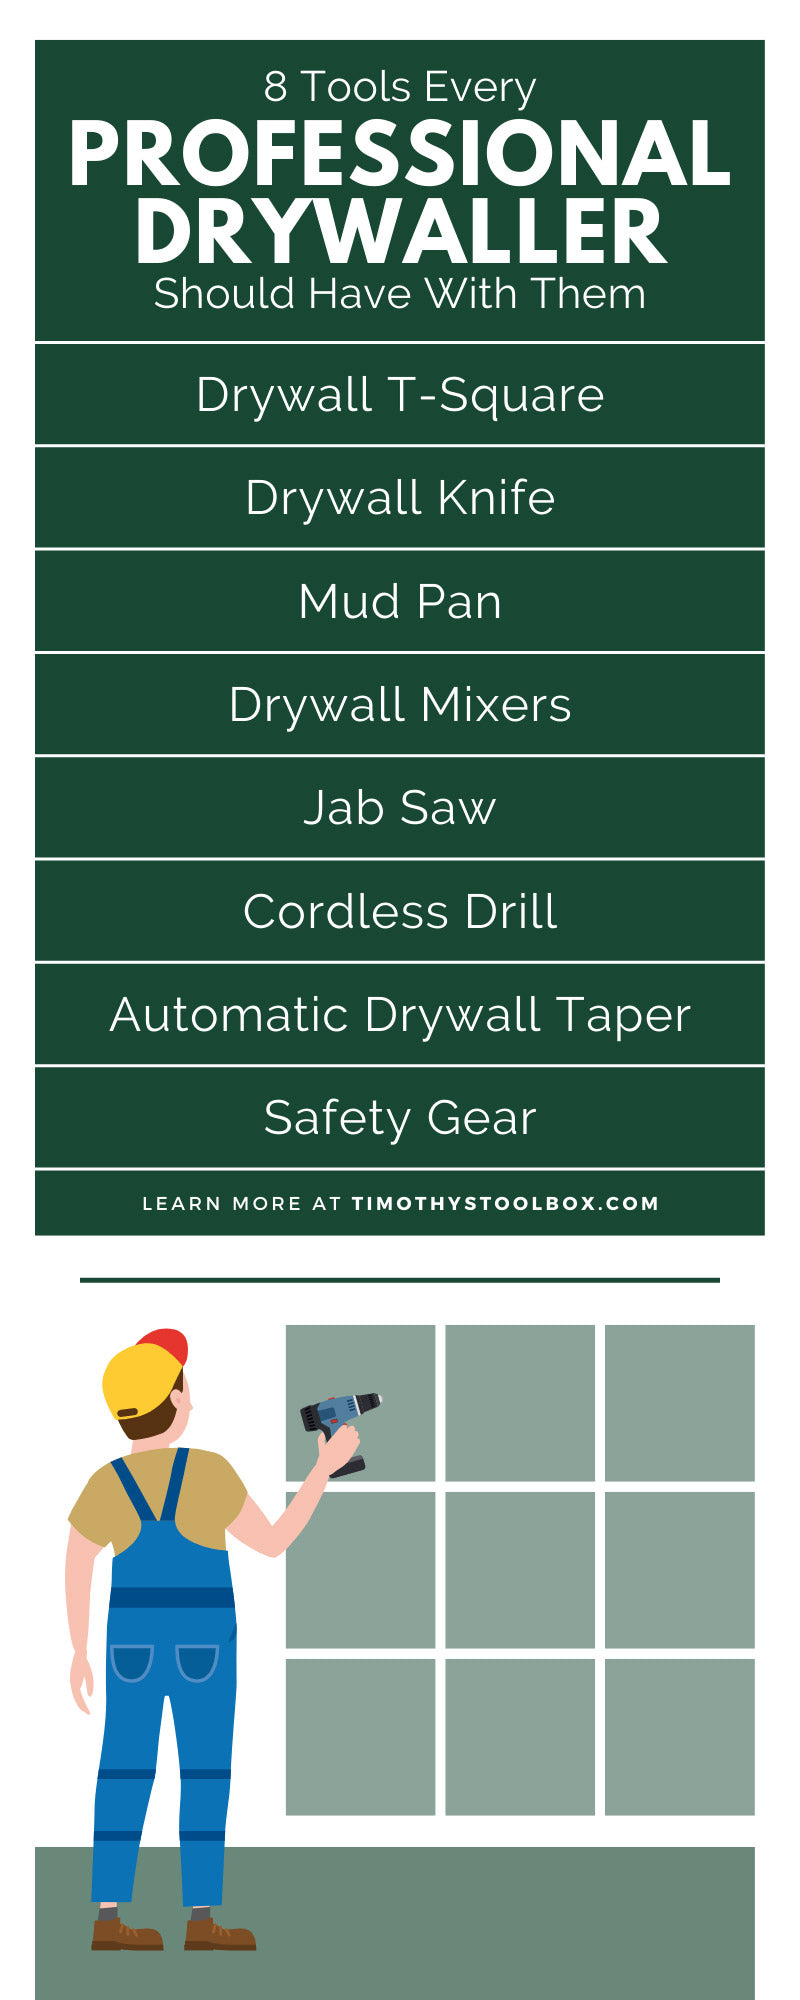 8 Tools Every Professional Drywaller Should Have With Them